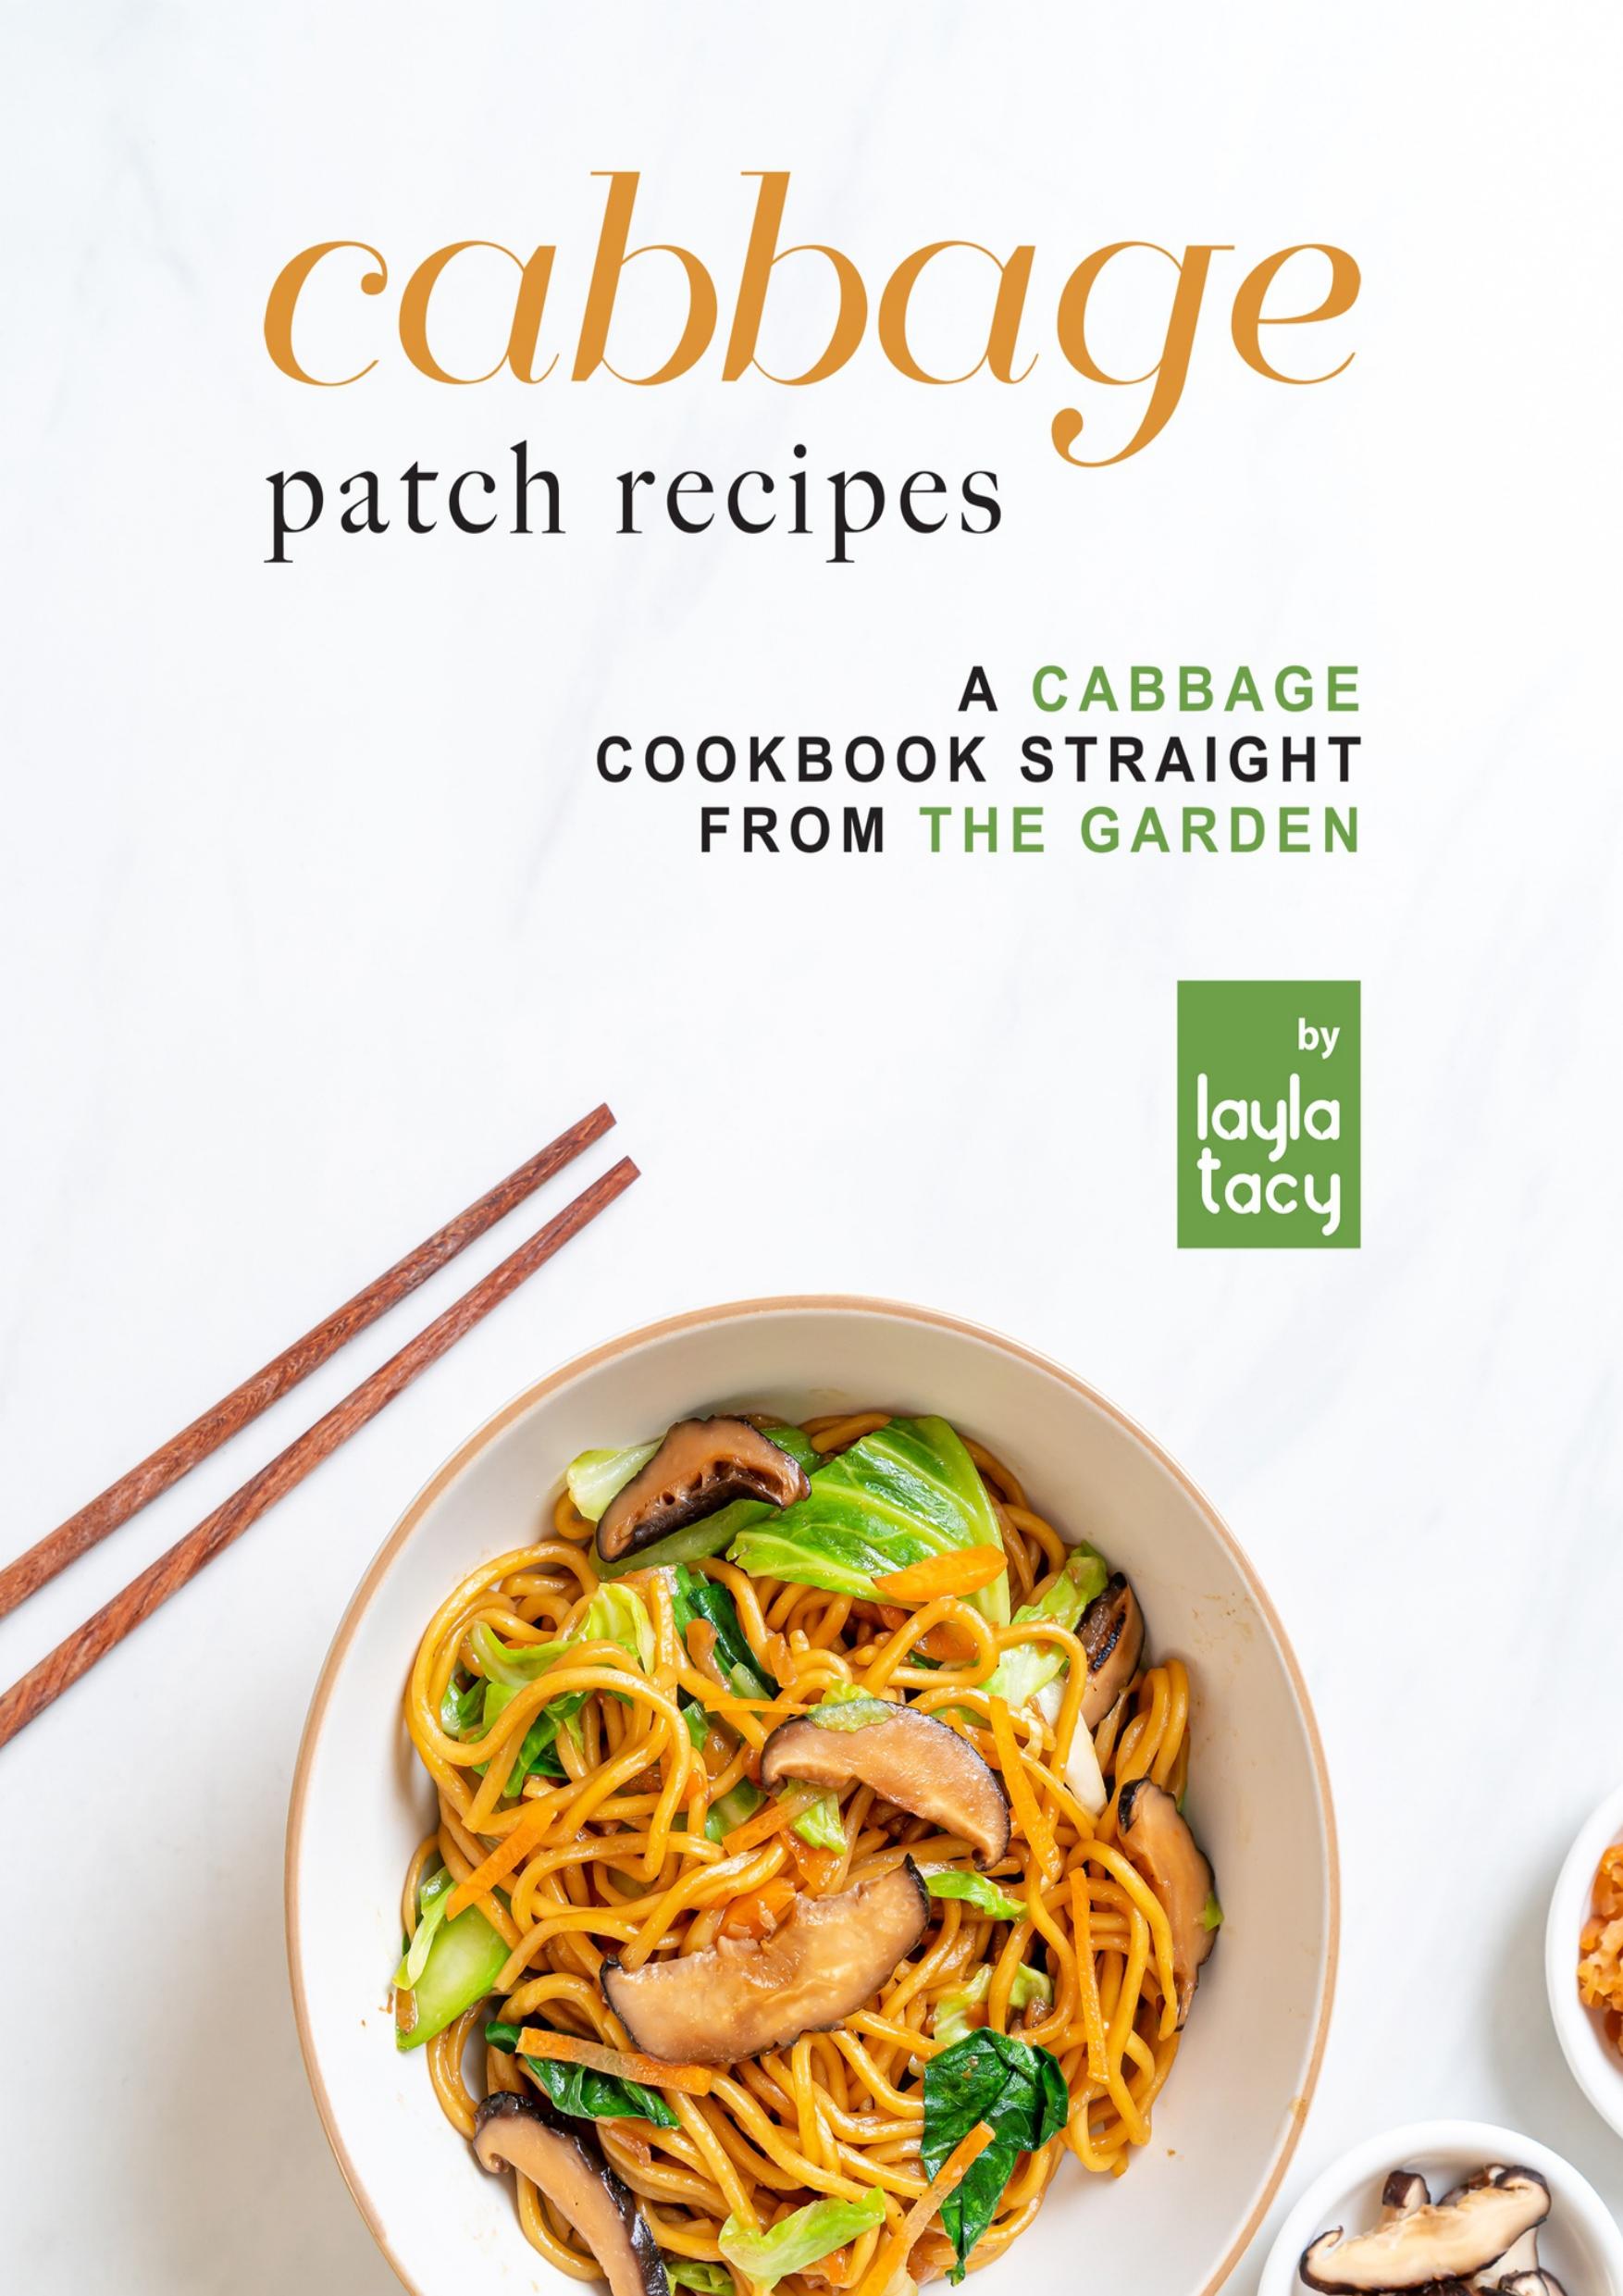 Cabbage Patch Recipes: A Cabbage Cookbook Straight from the Garden by Tacy Layla